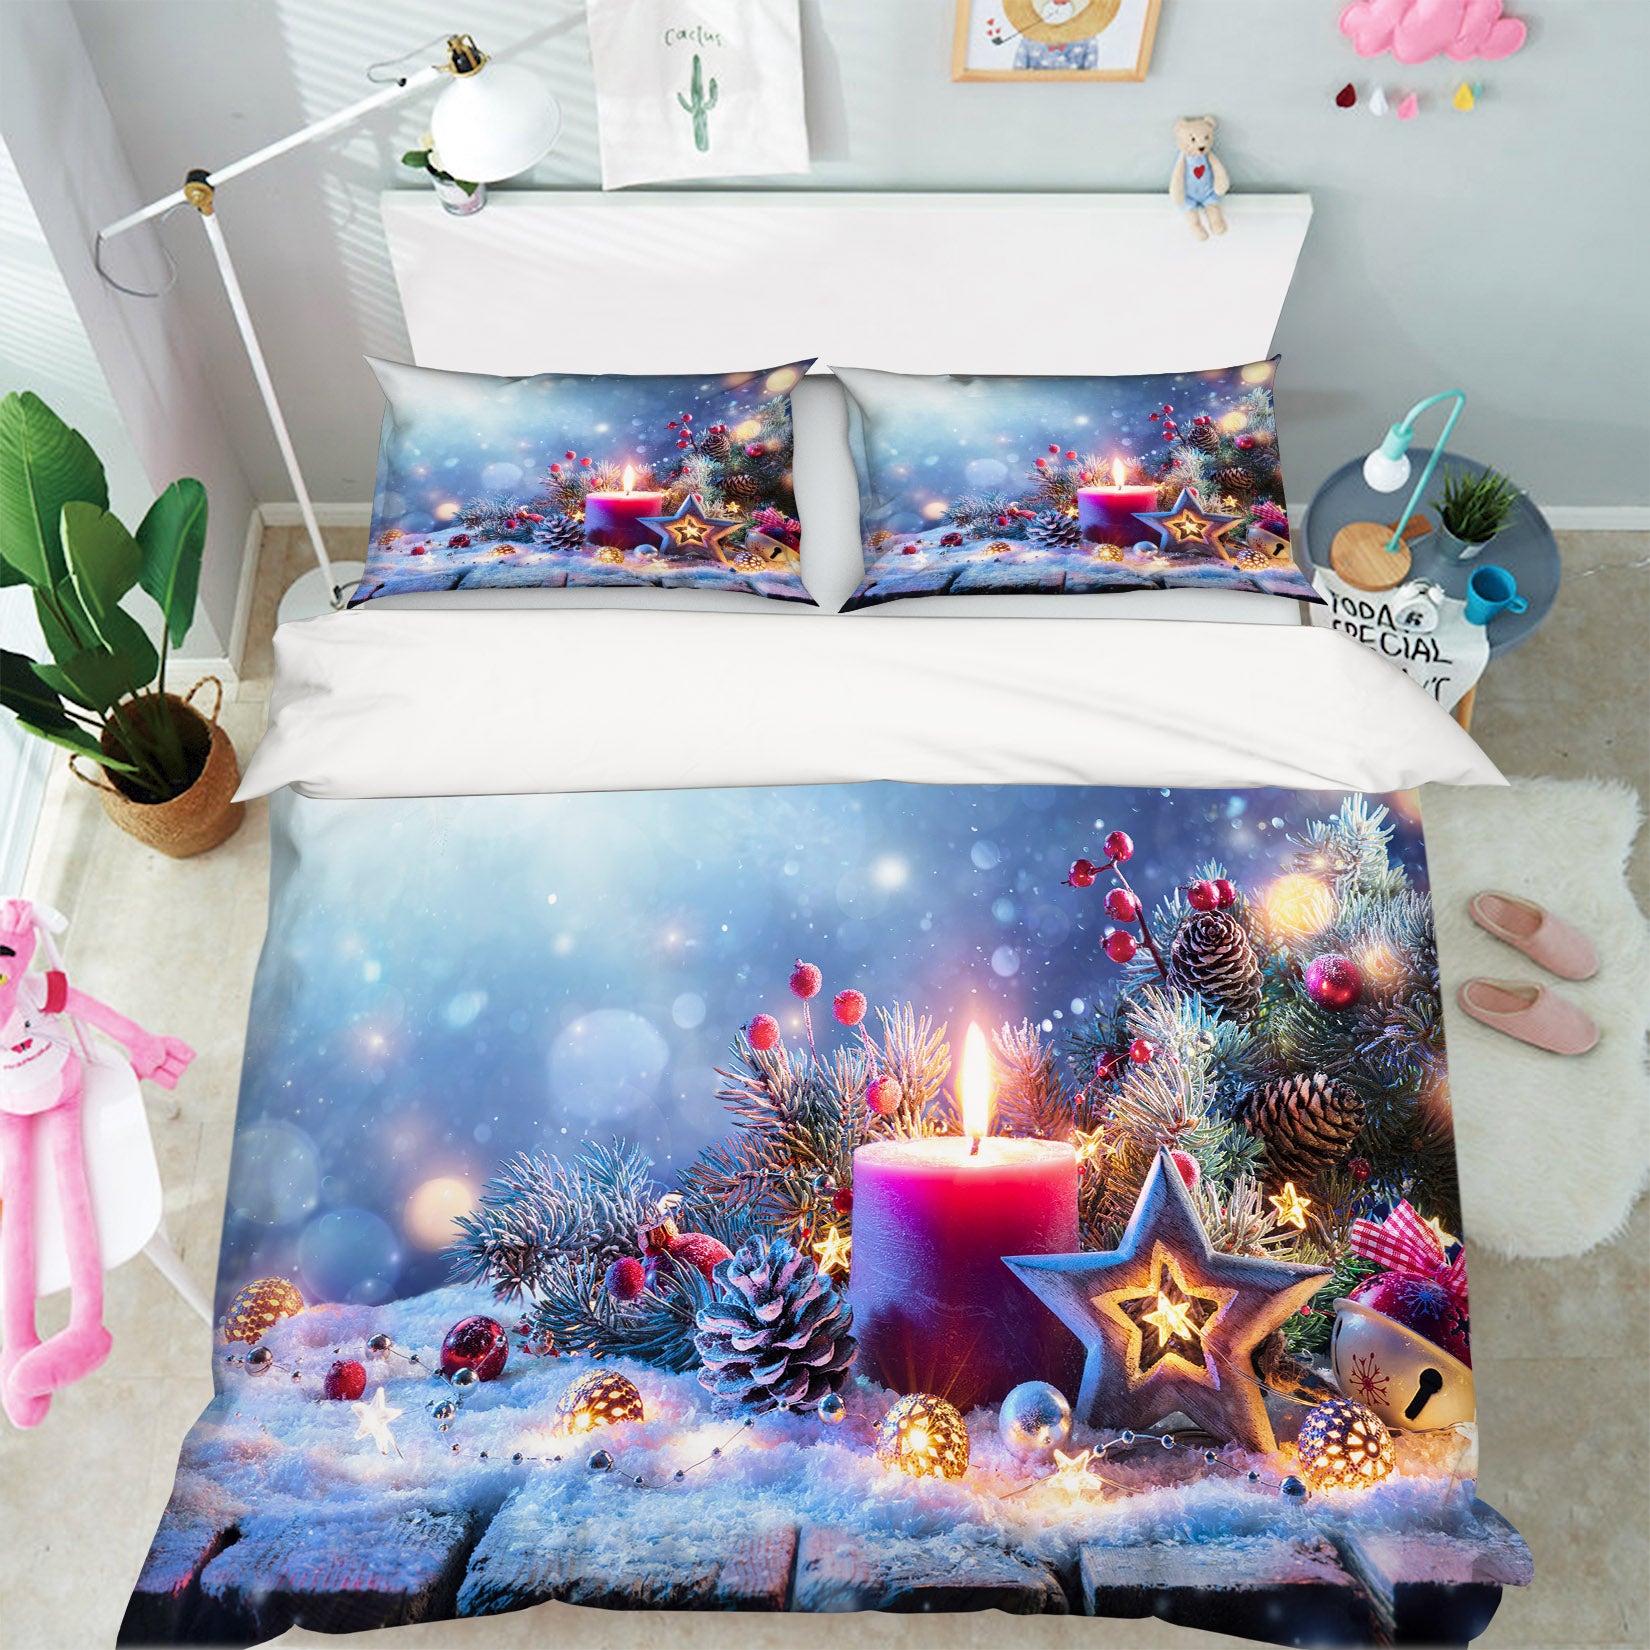 3D Snow Candle Pineta 51158 Christmas Quilt Duvet Cover Xmas Bed Pillowcases